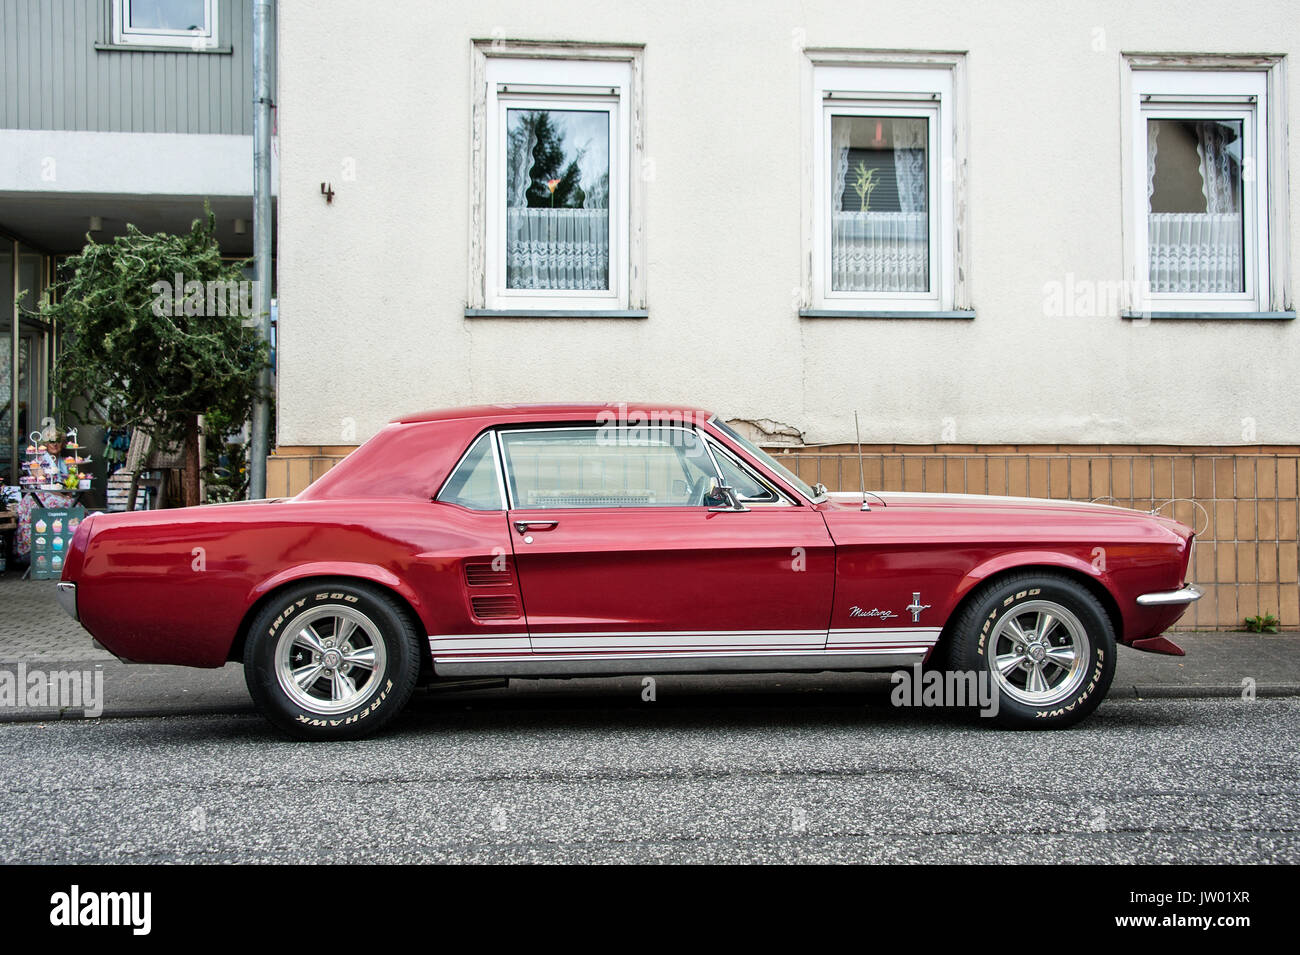 Vintage Car Festival 'Golden Oldies', Red Ford Mustang. Stock Photo